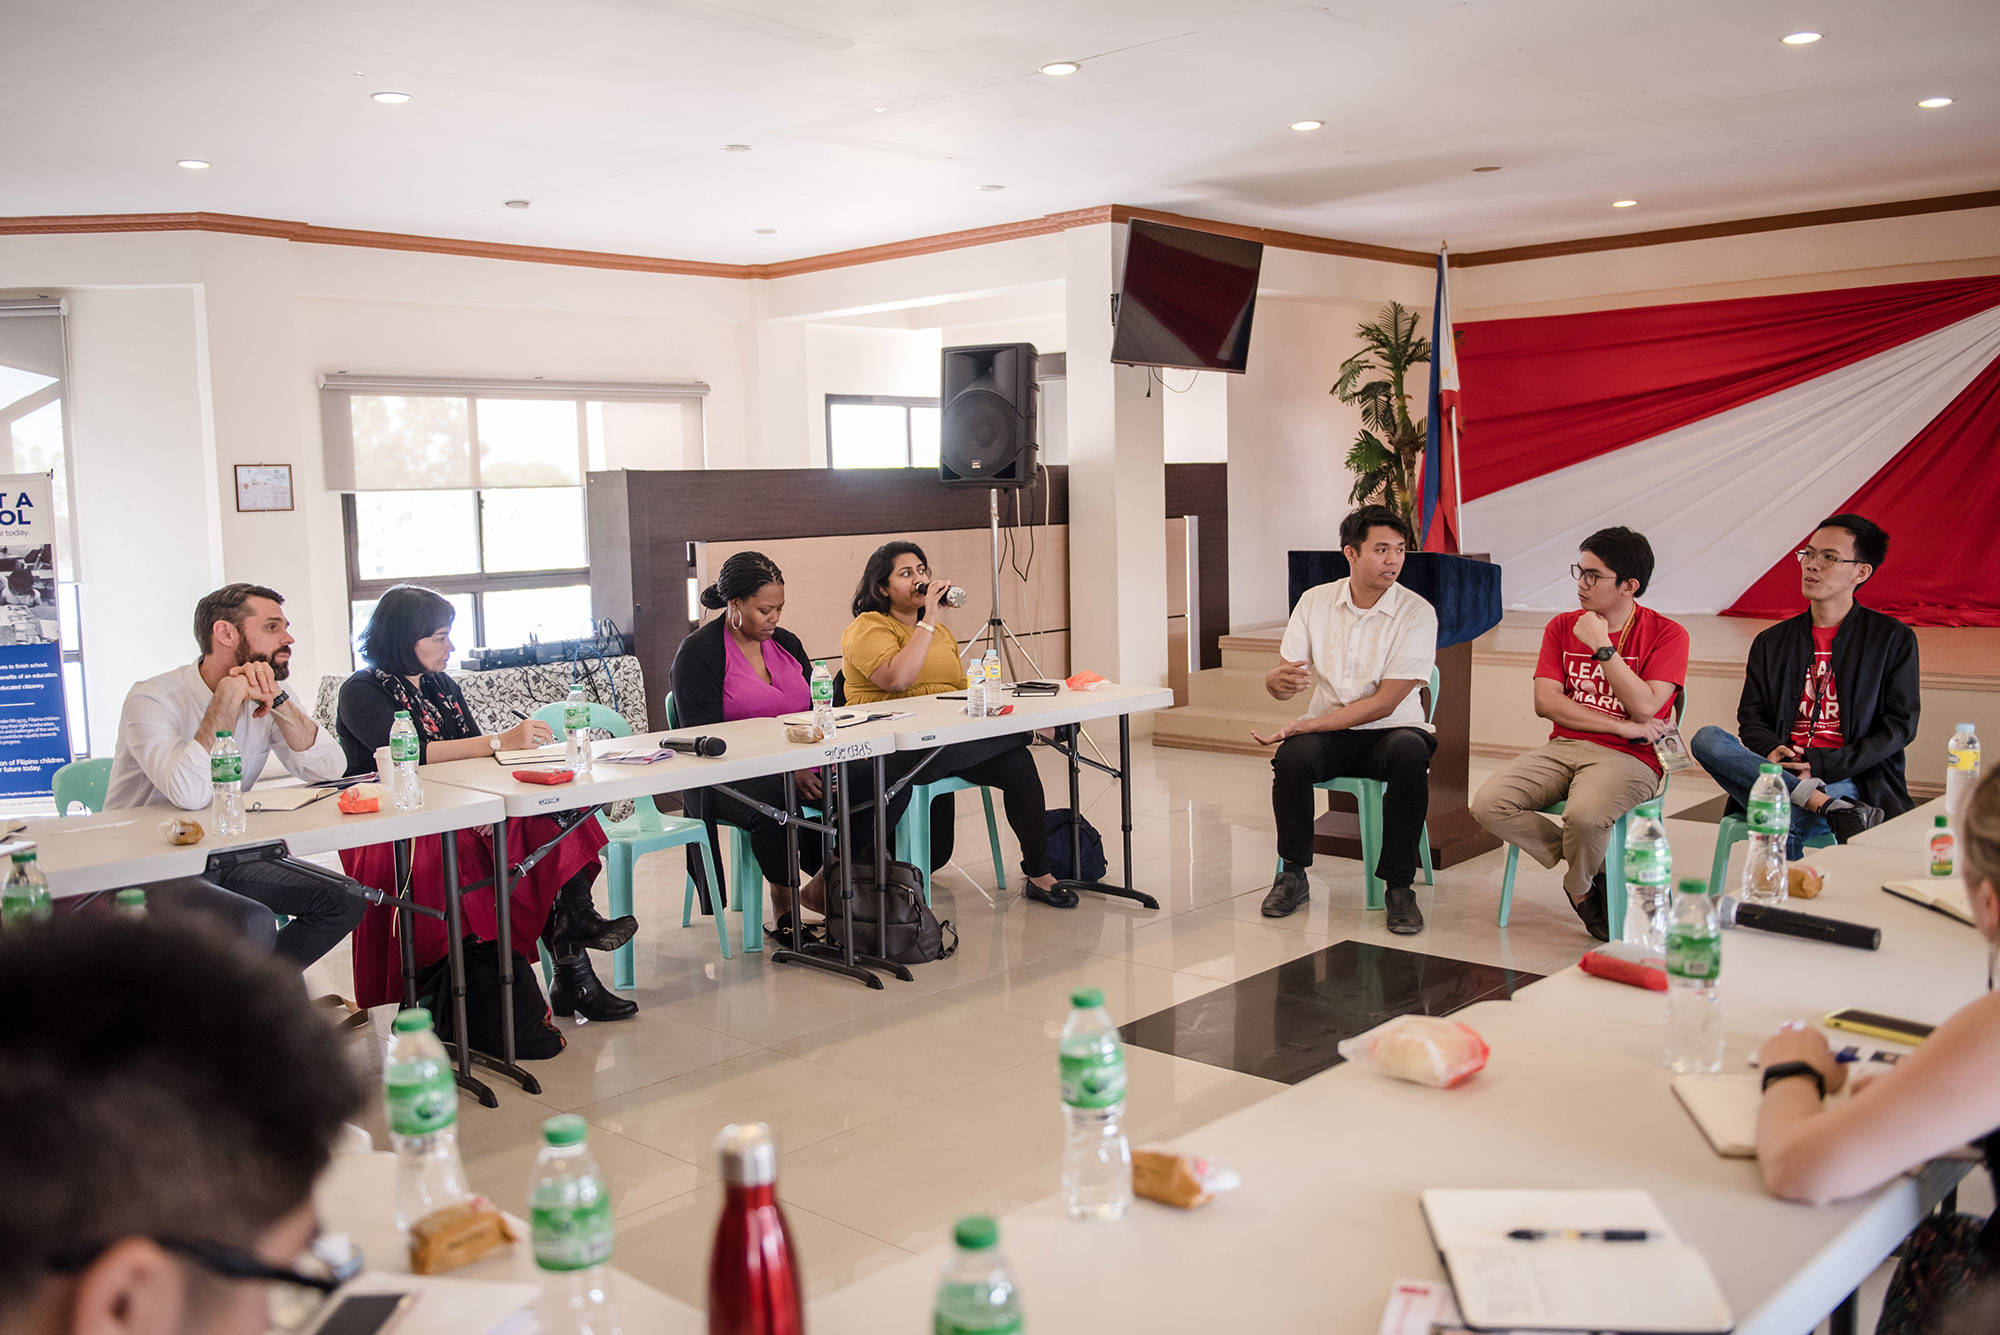 Network Learning Trip participants in a plenary discussion with Teach for the Philippines Alumni in Laguna